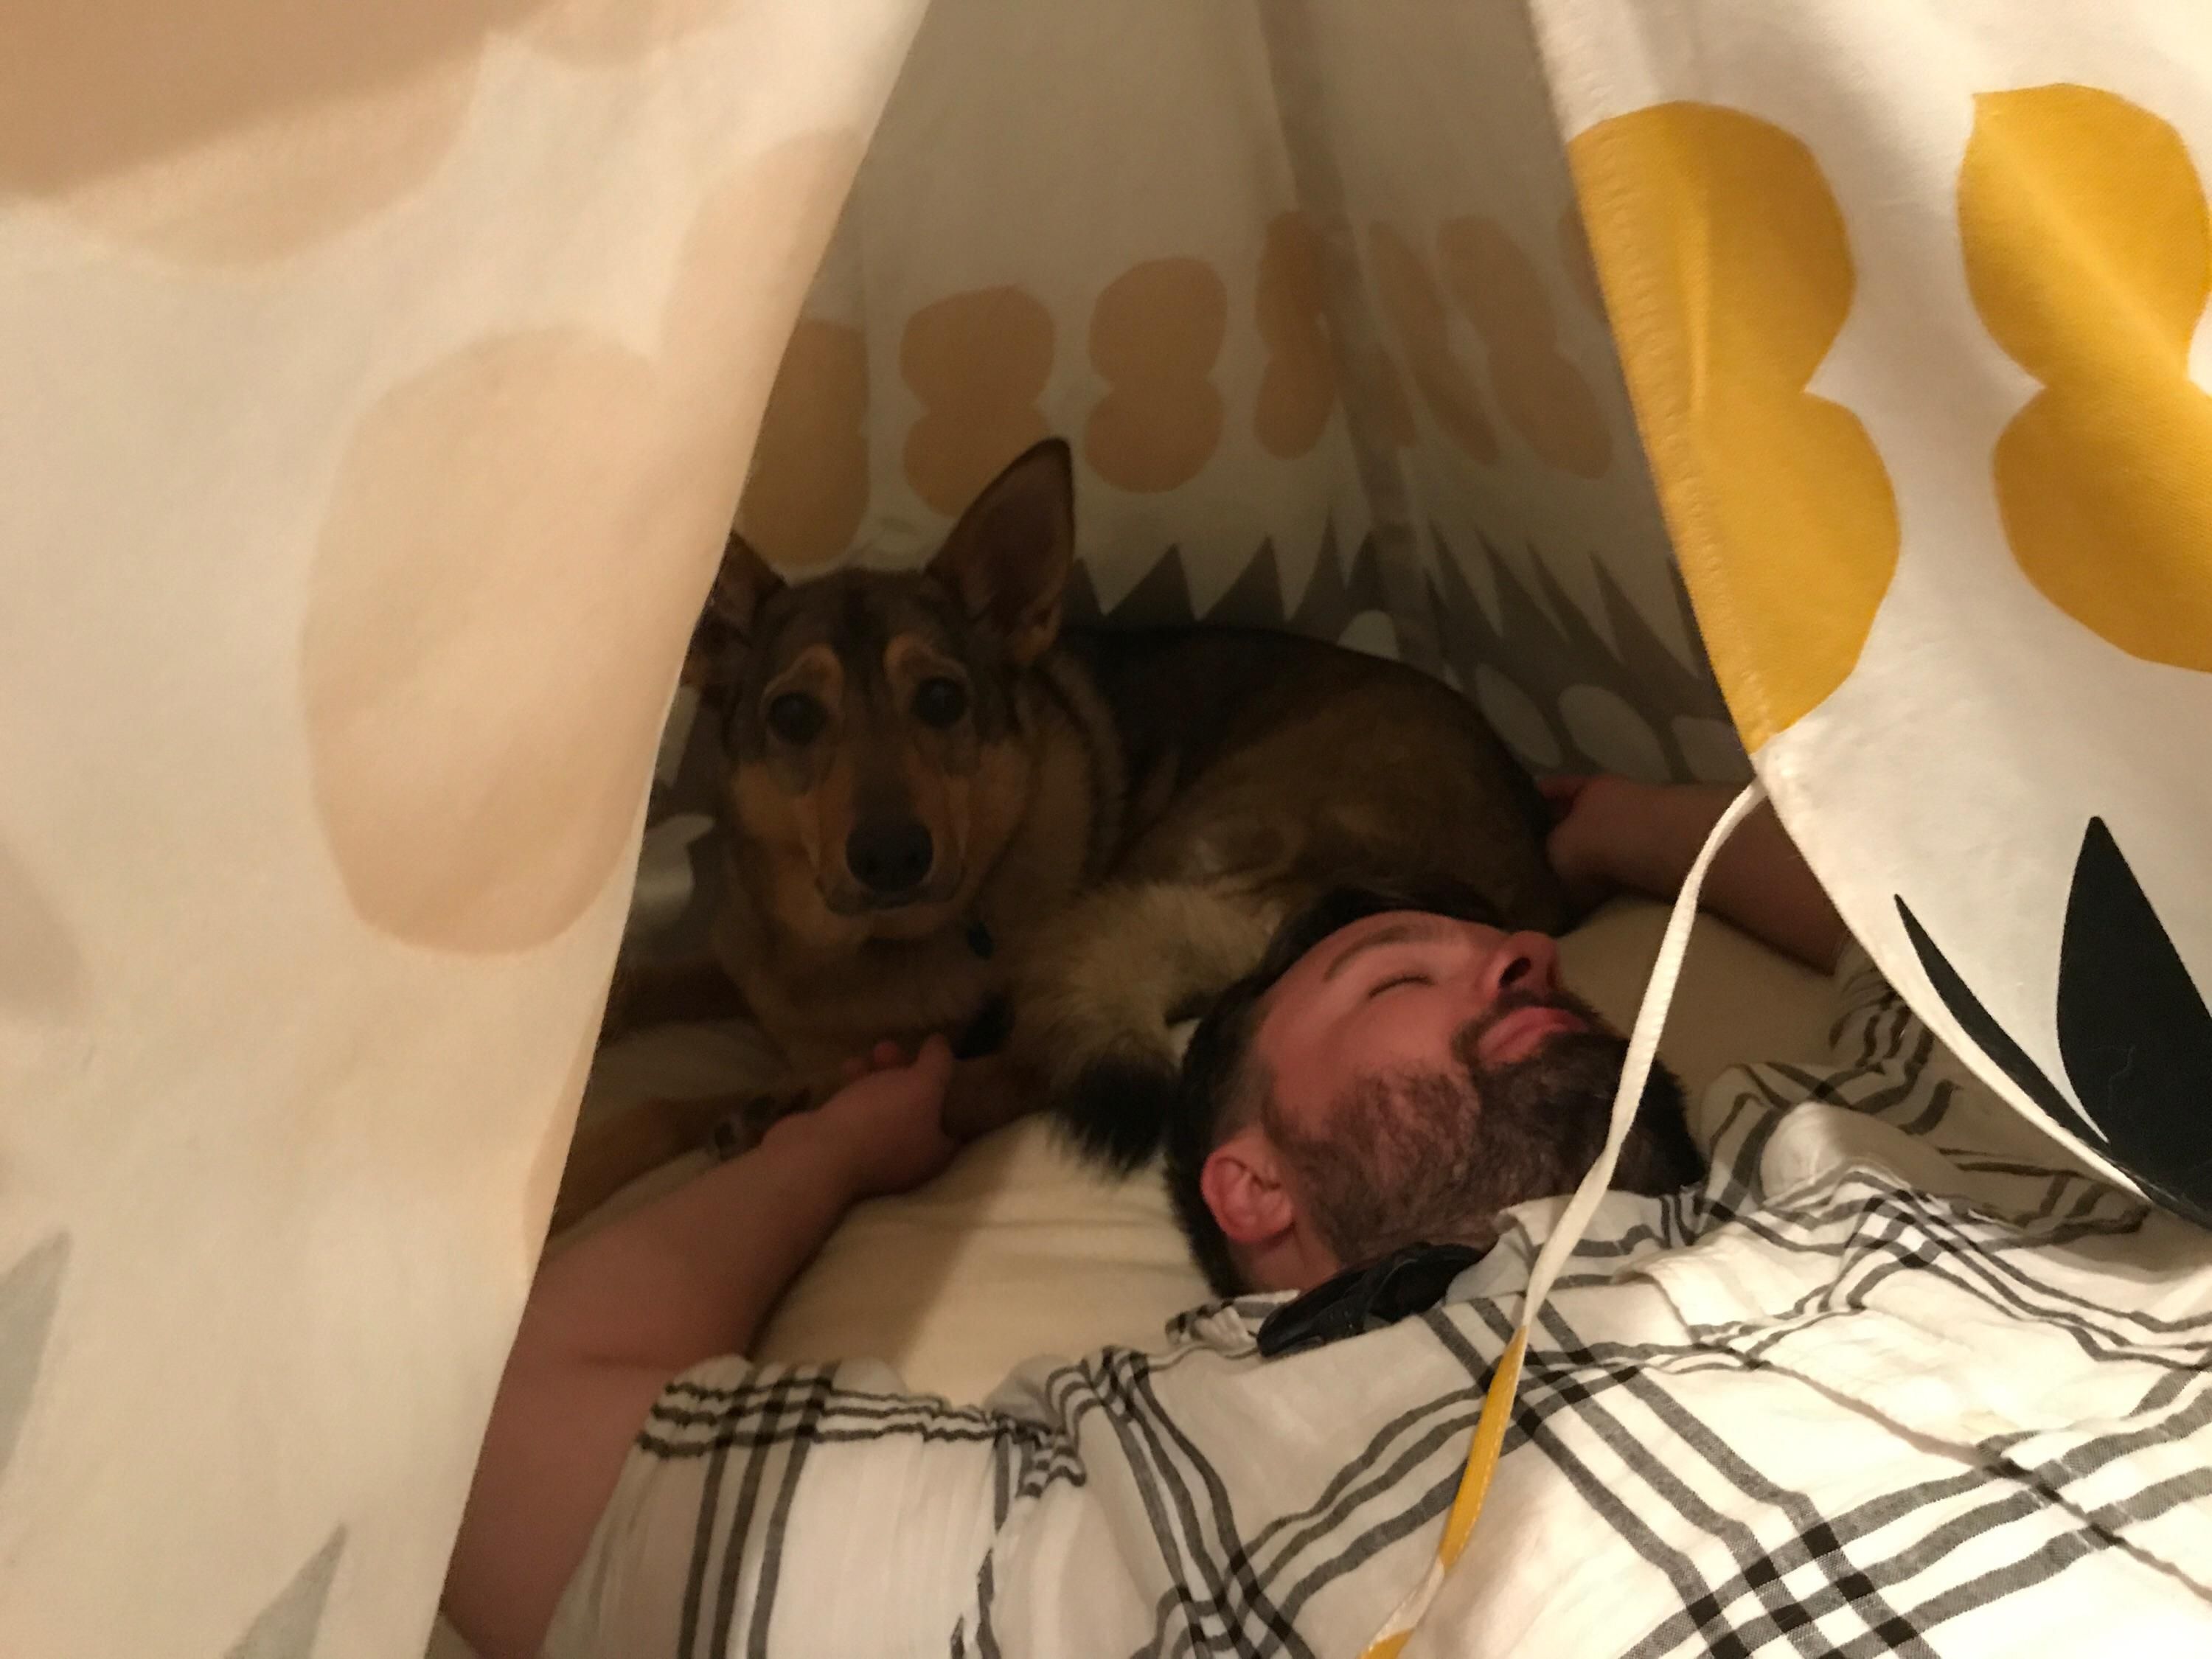 My dog wasn't happy when a drunk friend decided to sleep with her at 1 am.